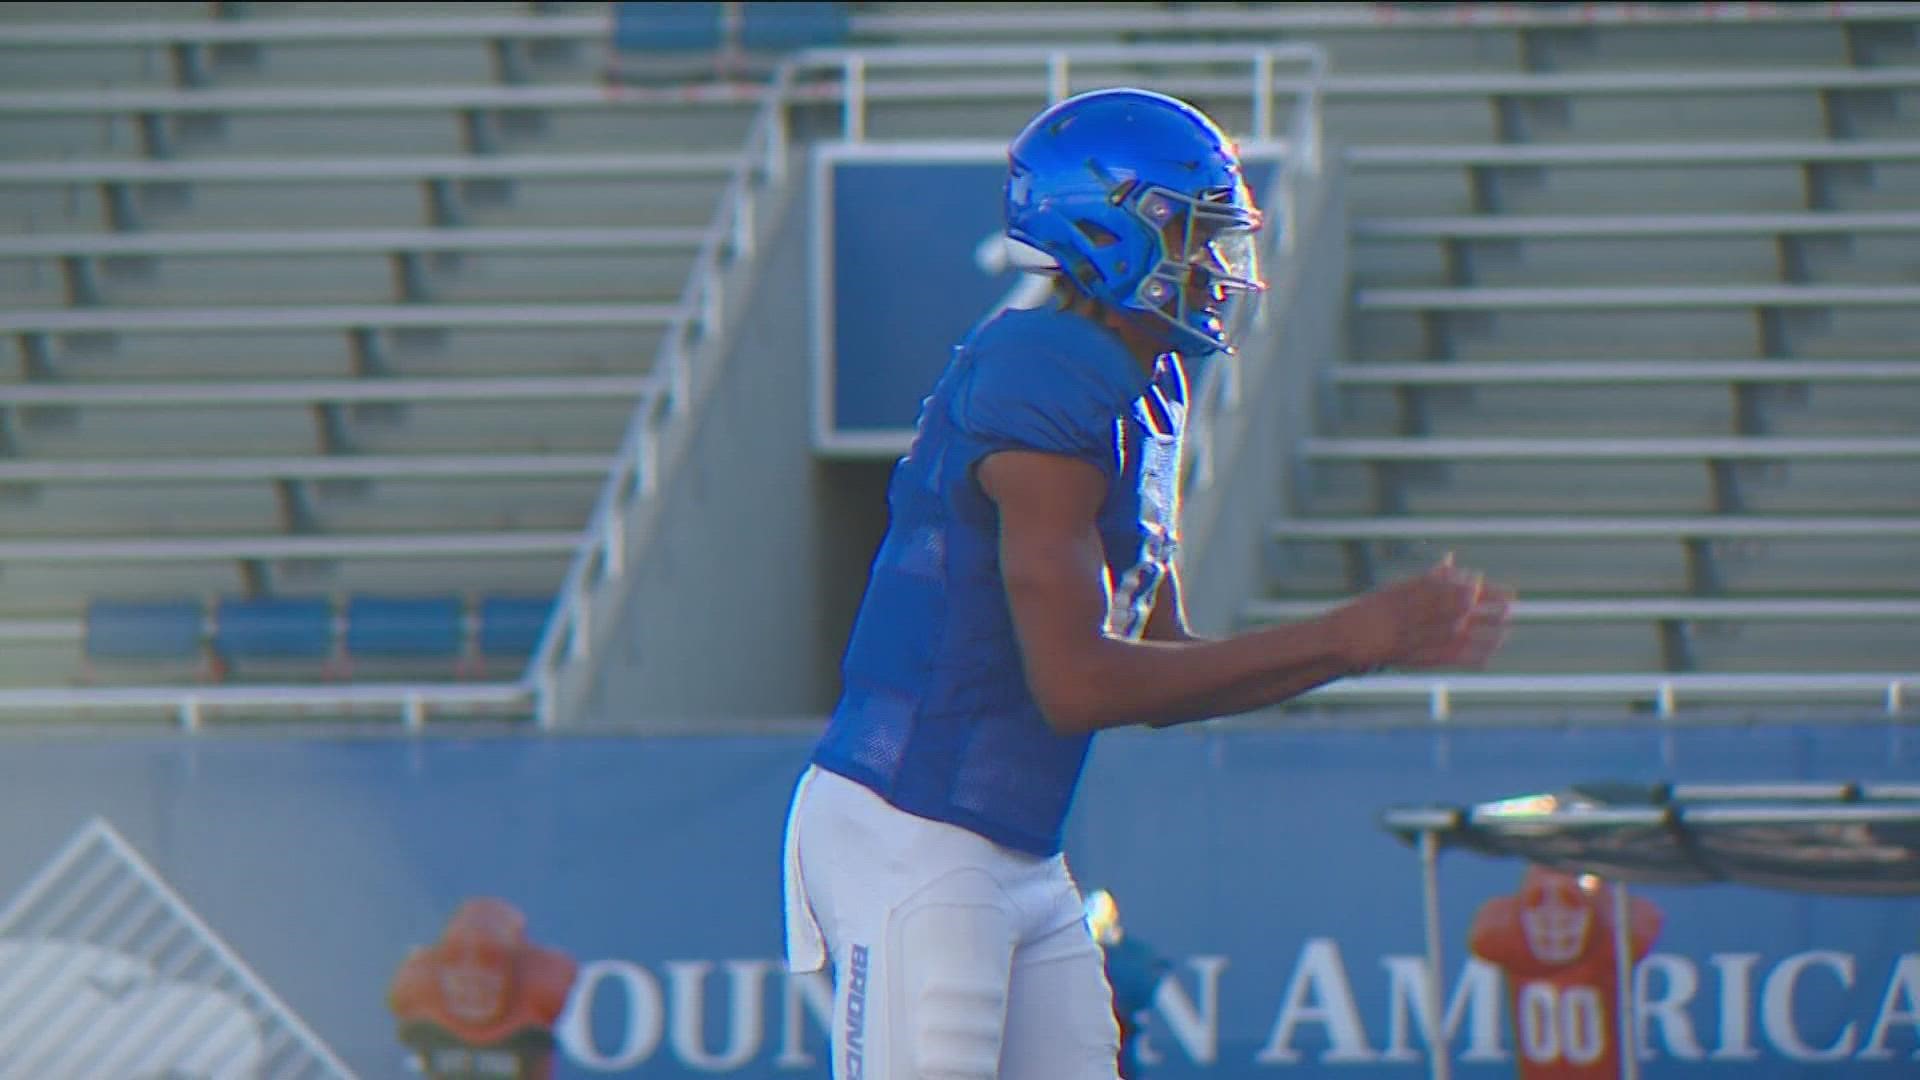 Redshirt freshman quarterback Taylen Green will start behind center for Boise State Friday against San Diego State, head coach Andy Avalos said Tuesday.